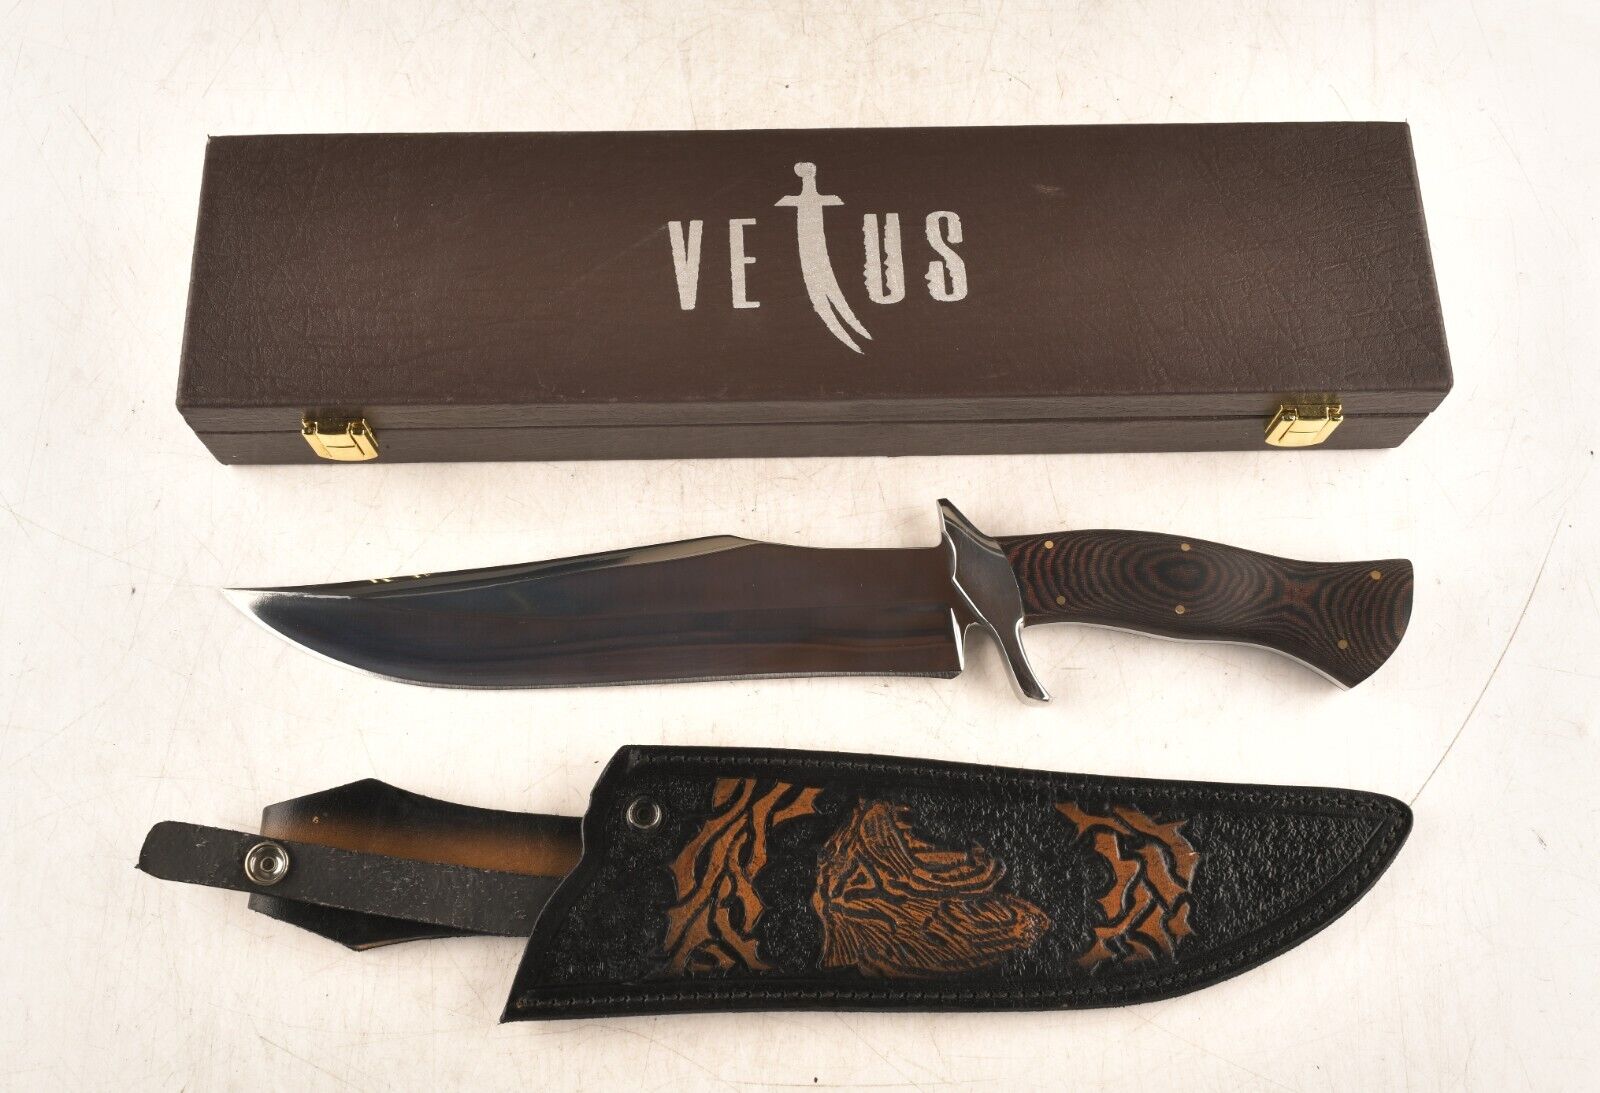 *Vetus Tiger Bowie Knife Stainless Steel with Engraved Sheath and Gift Box